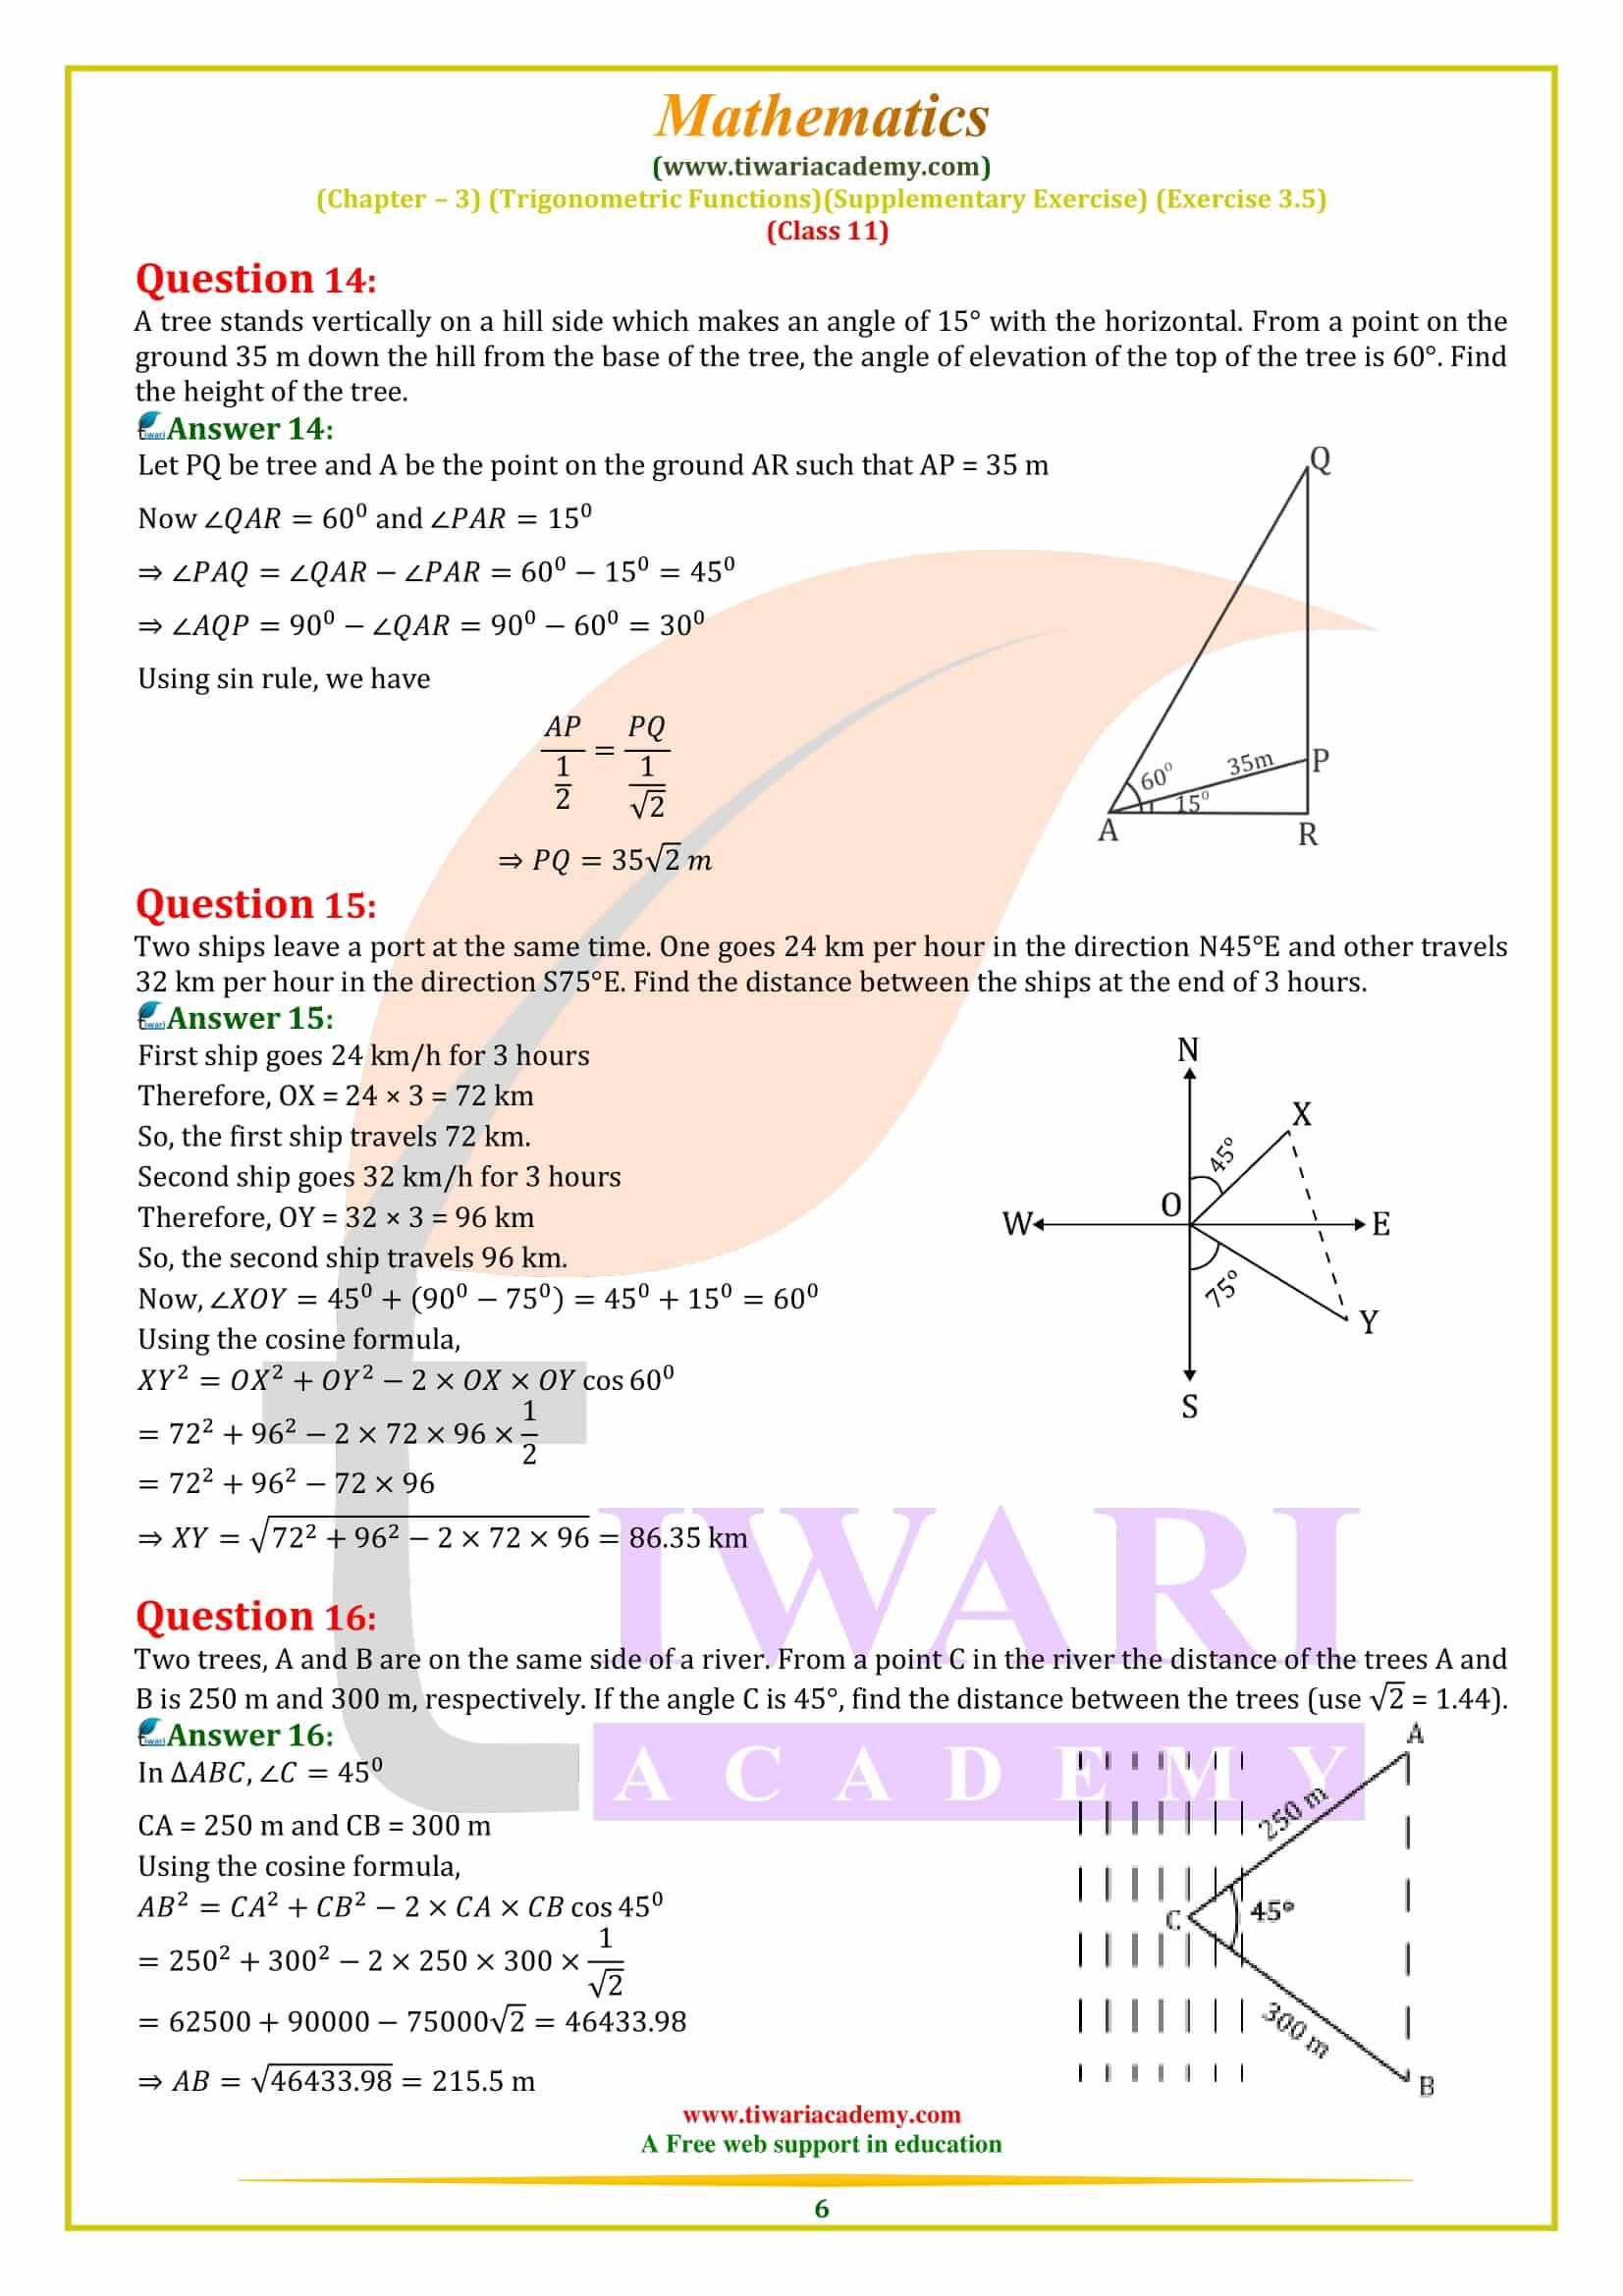 NCERT Solutions for Class 11 Maths Chapter 3 Suppl. Exercise 3.5